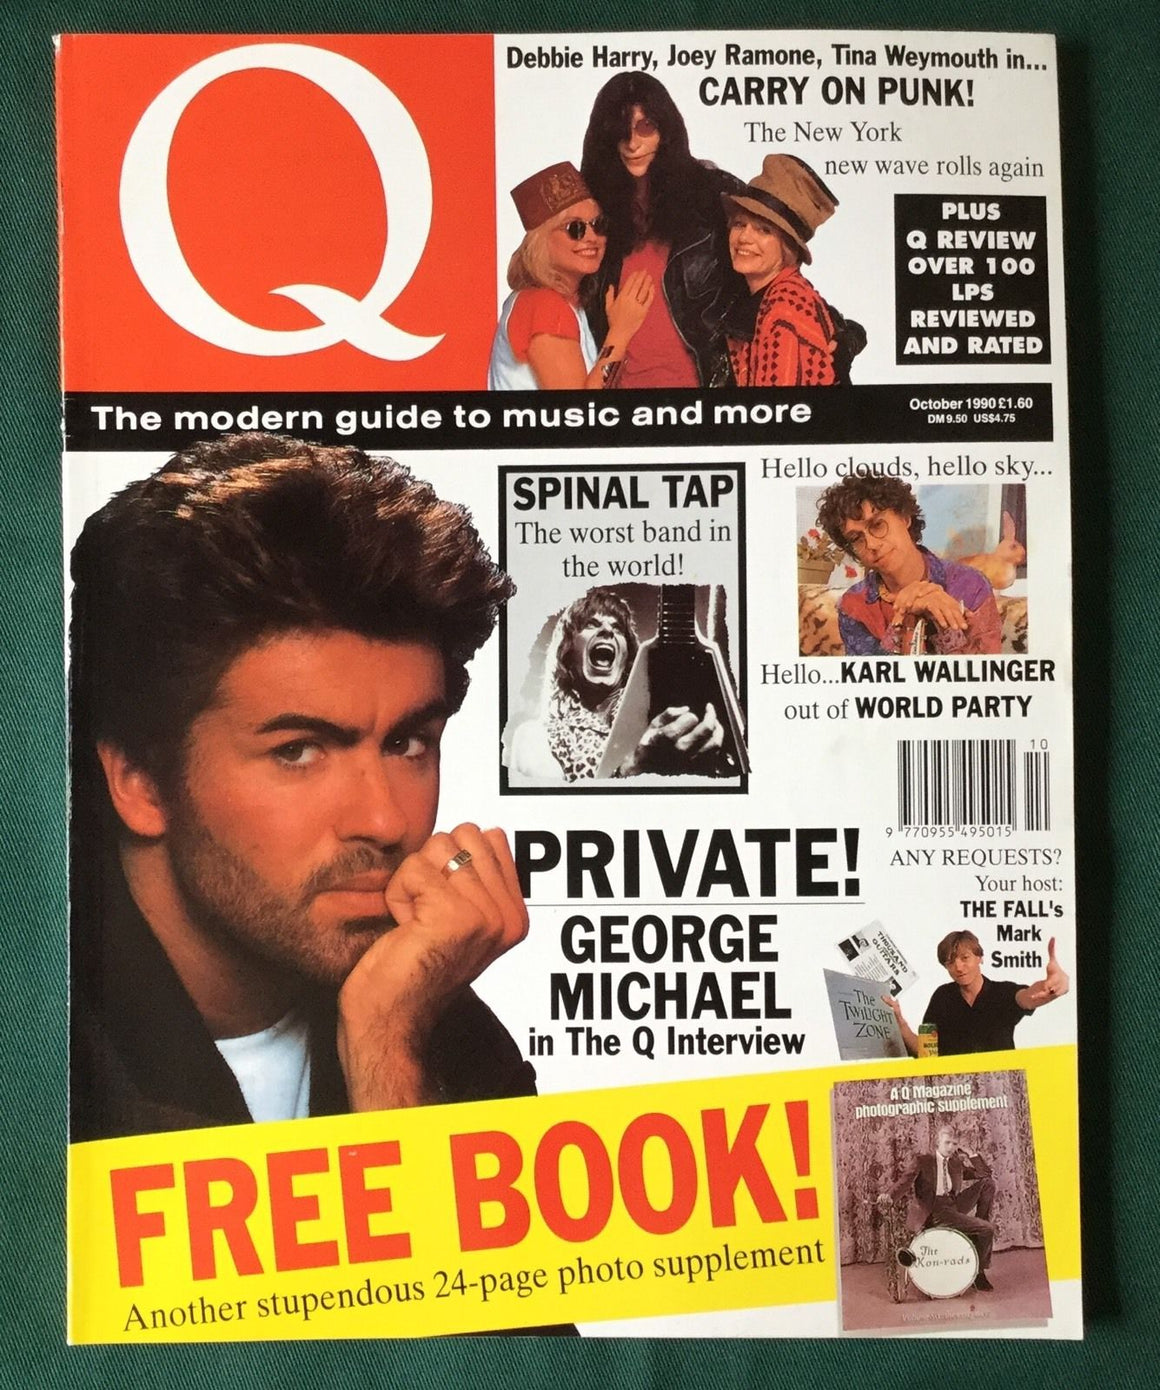 Q MAGAZINE - OCTOBER 1990 - GEORGE MICHAEL, THE FALL BLONDIE SPINAL TAP